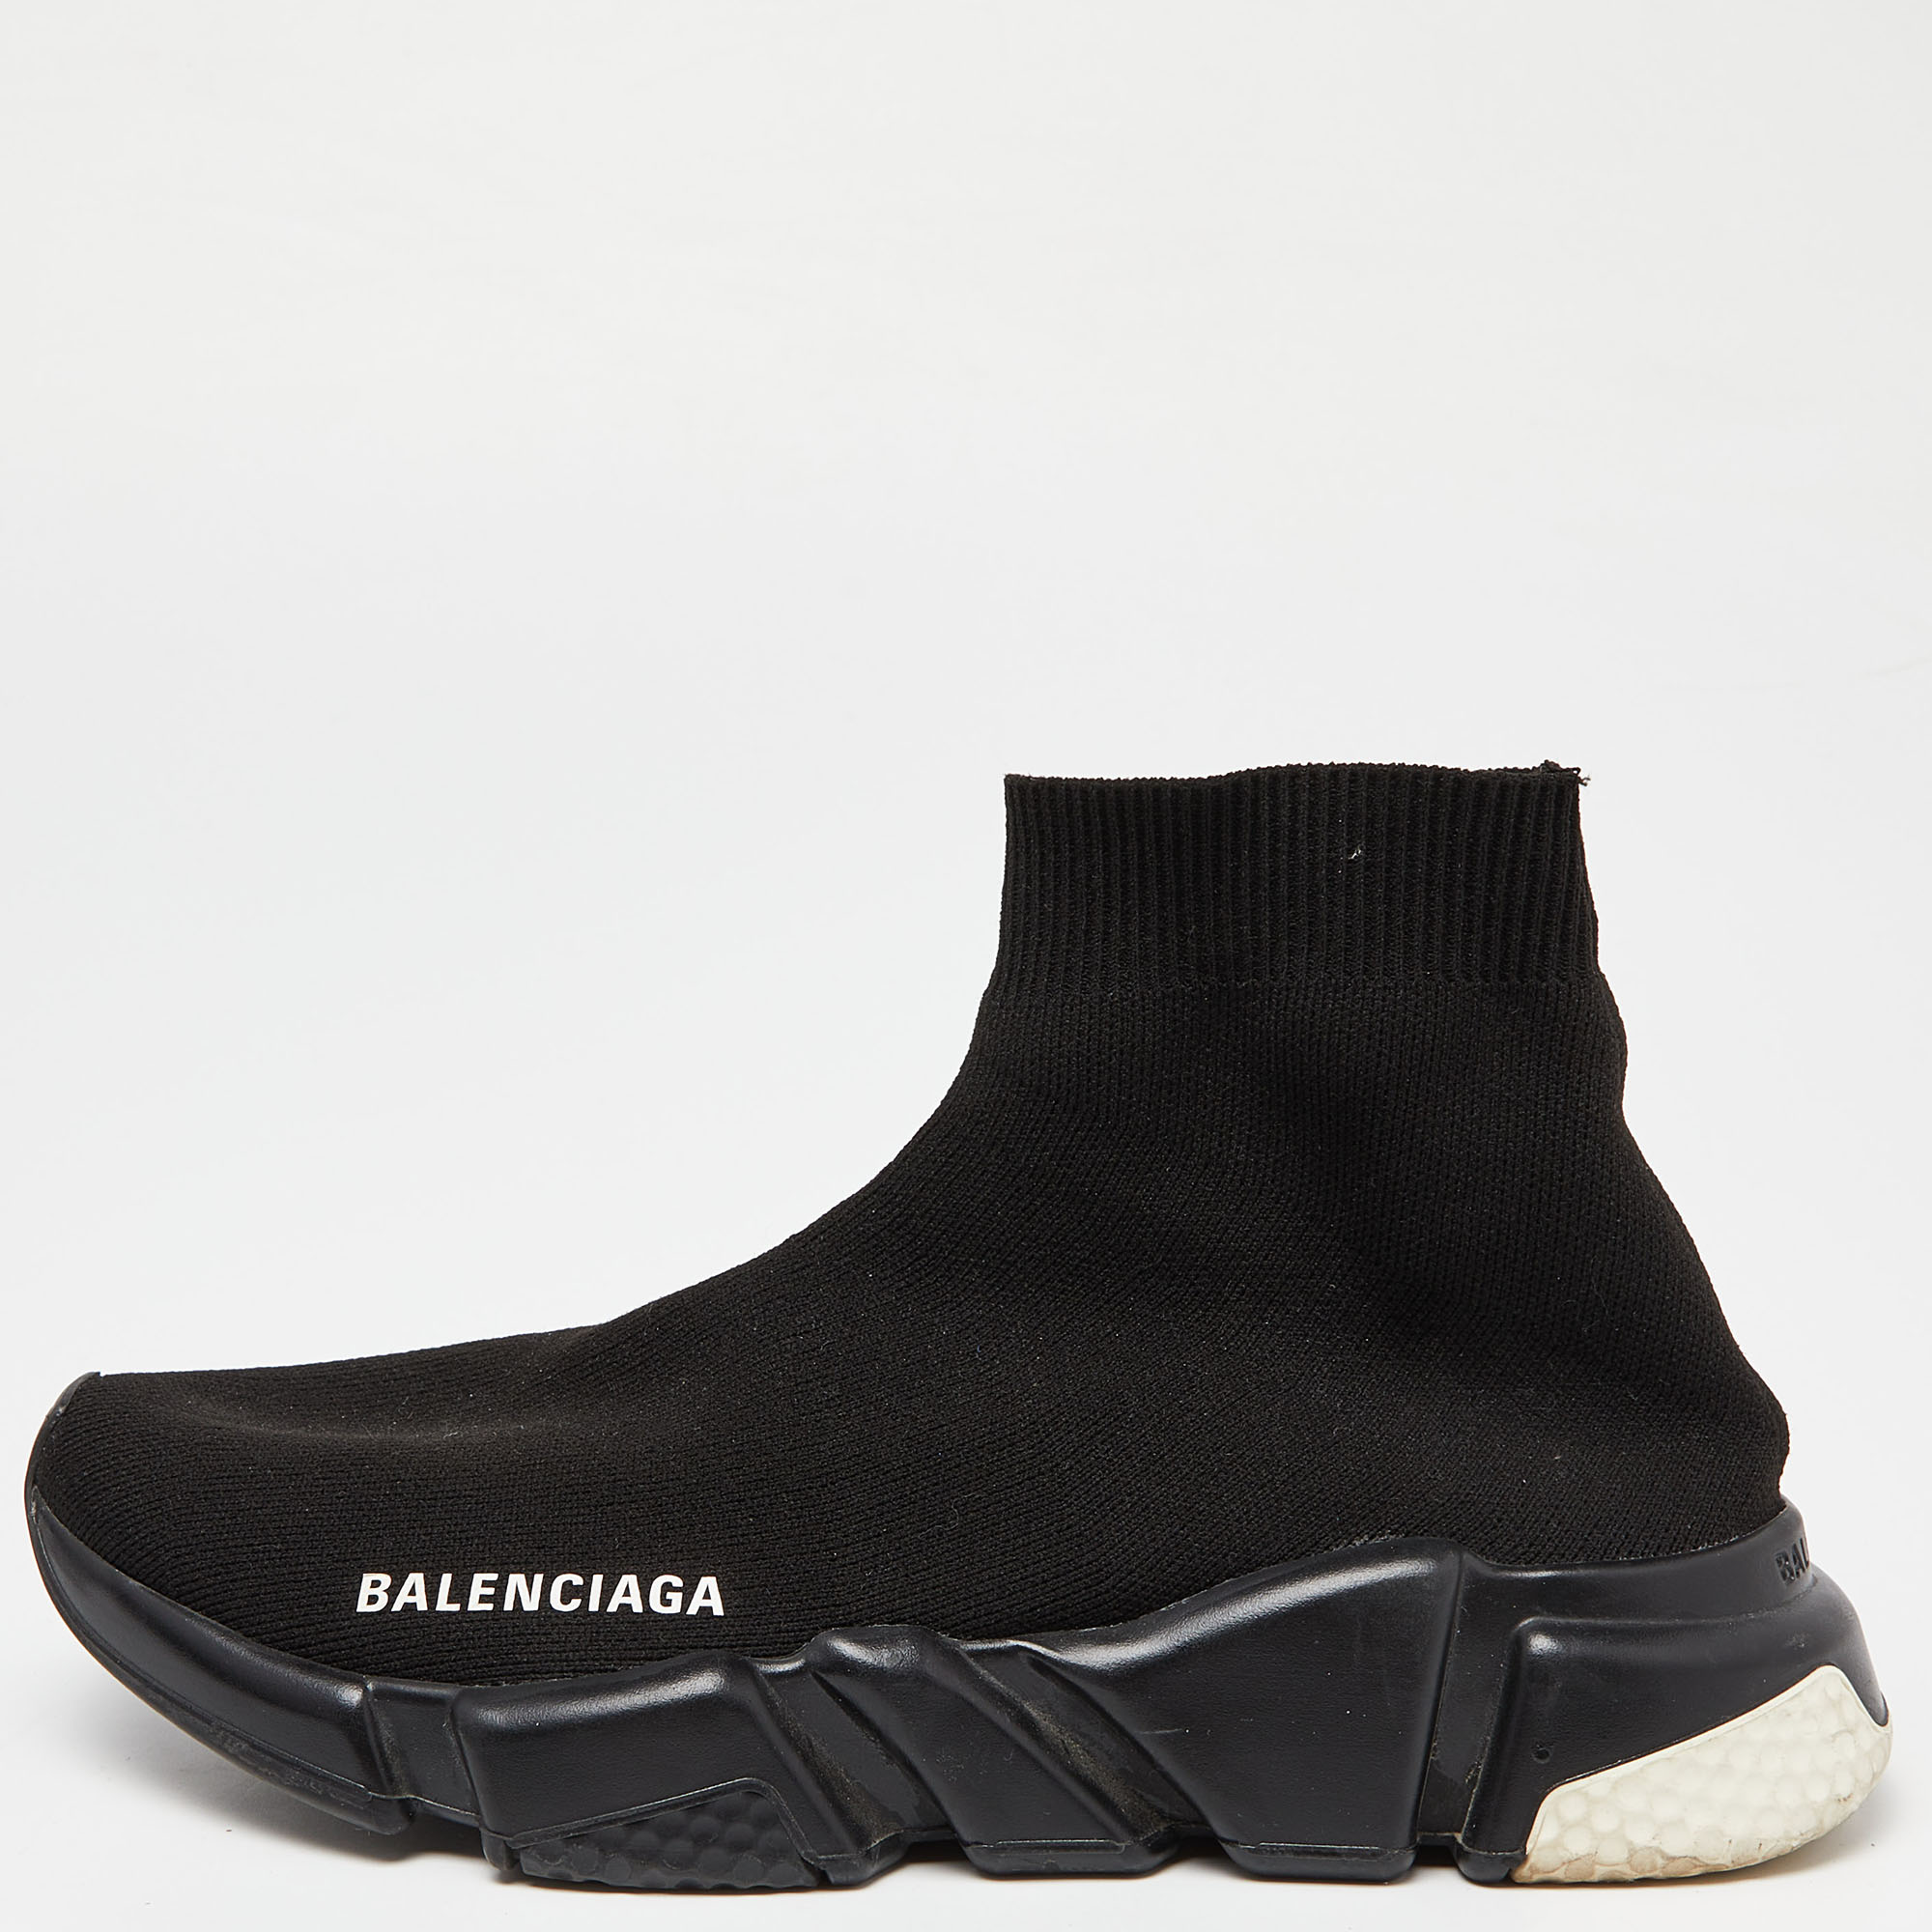 Pre-owned Balenciaga Black Knit Fabric Speed Trainer High-top Sneakers Size 37